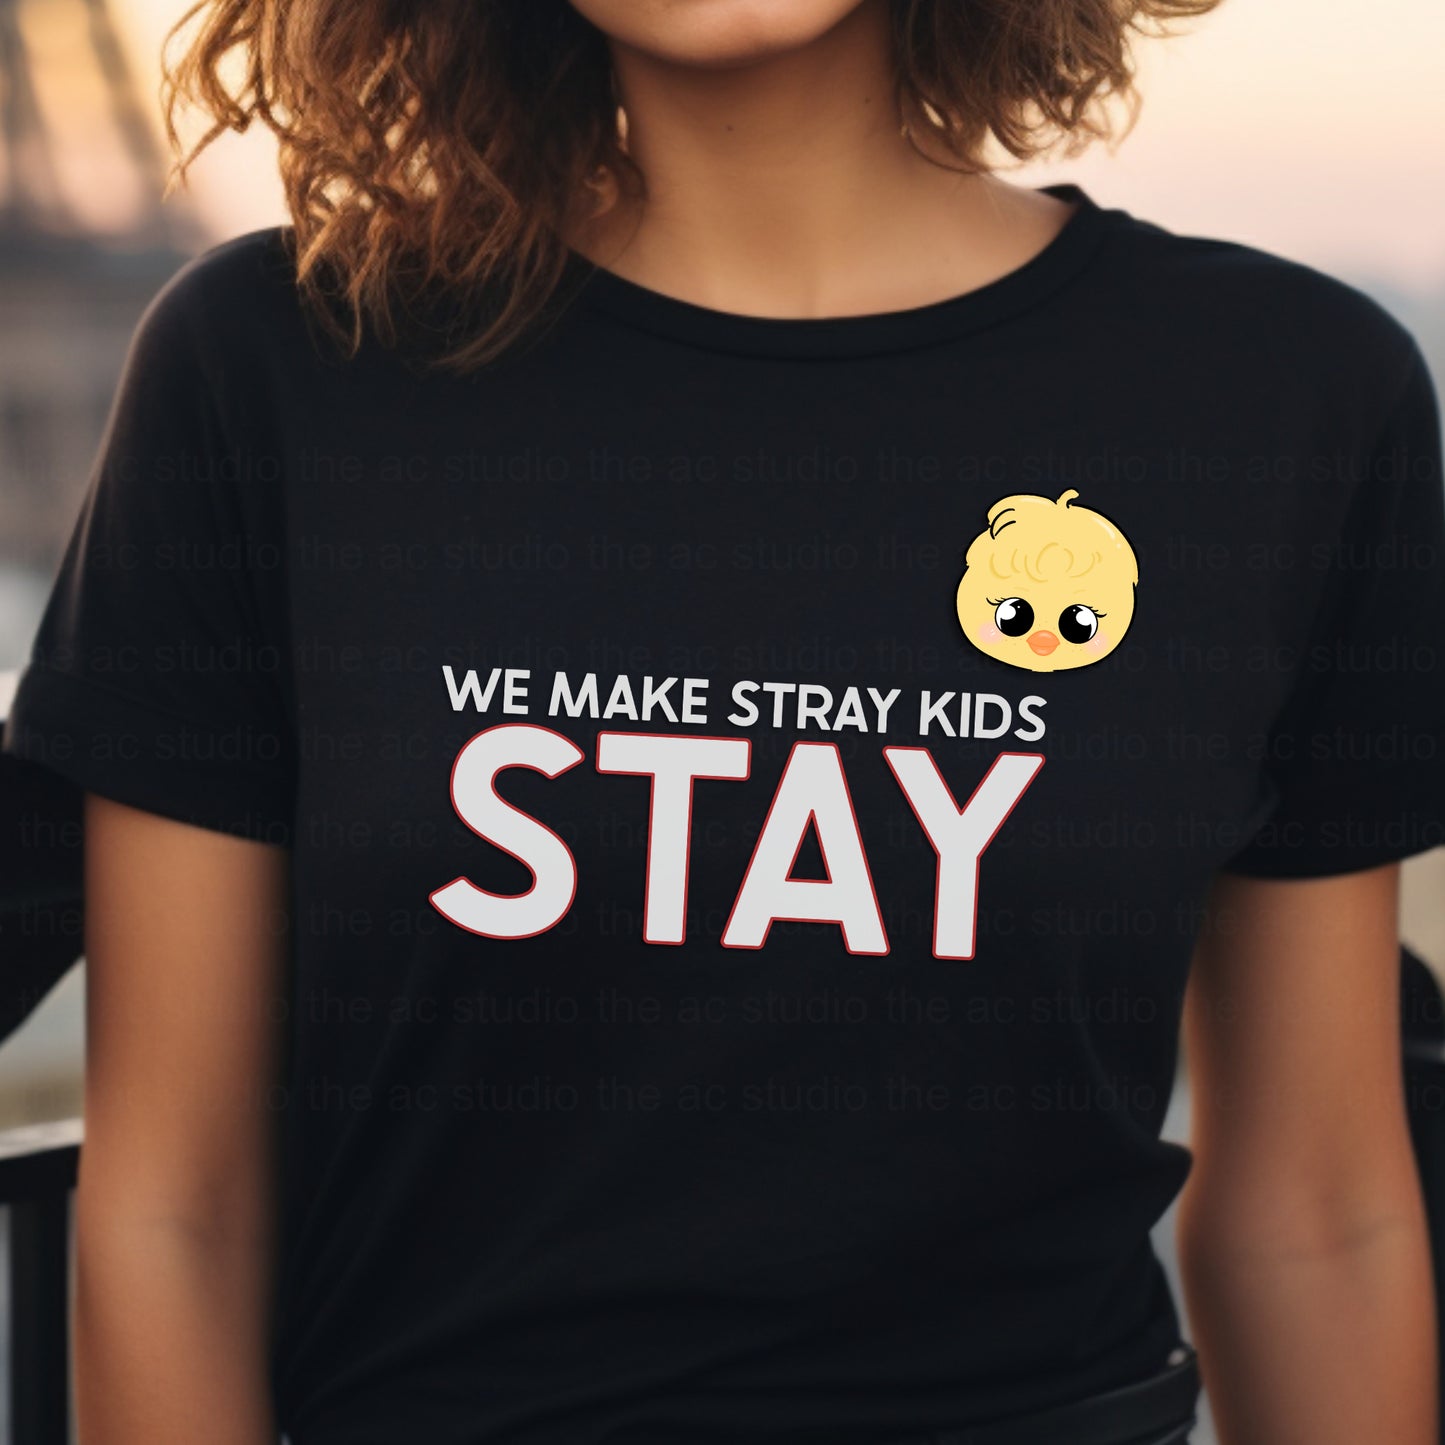 STAY - We Make SK Stay T-Shirt (Black)